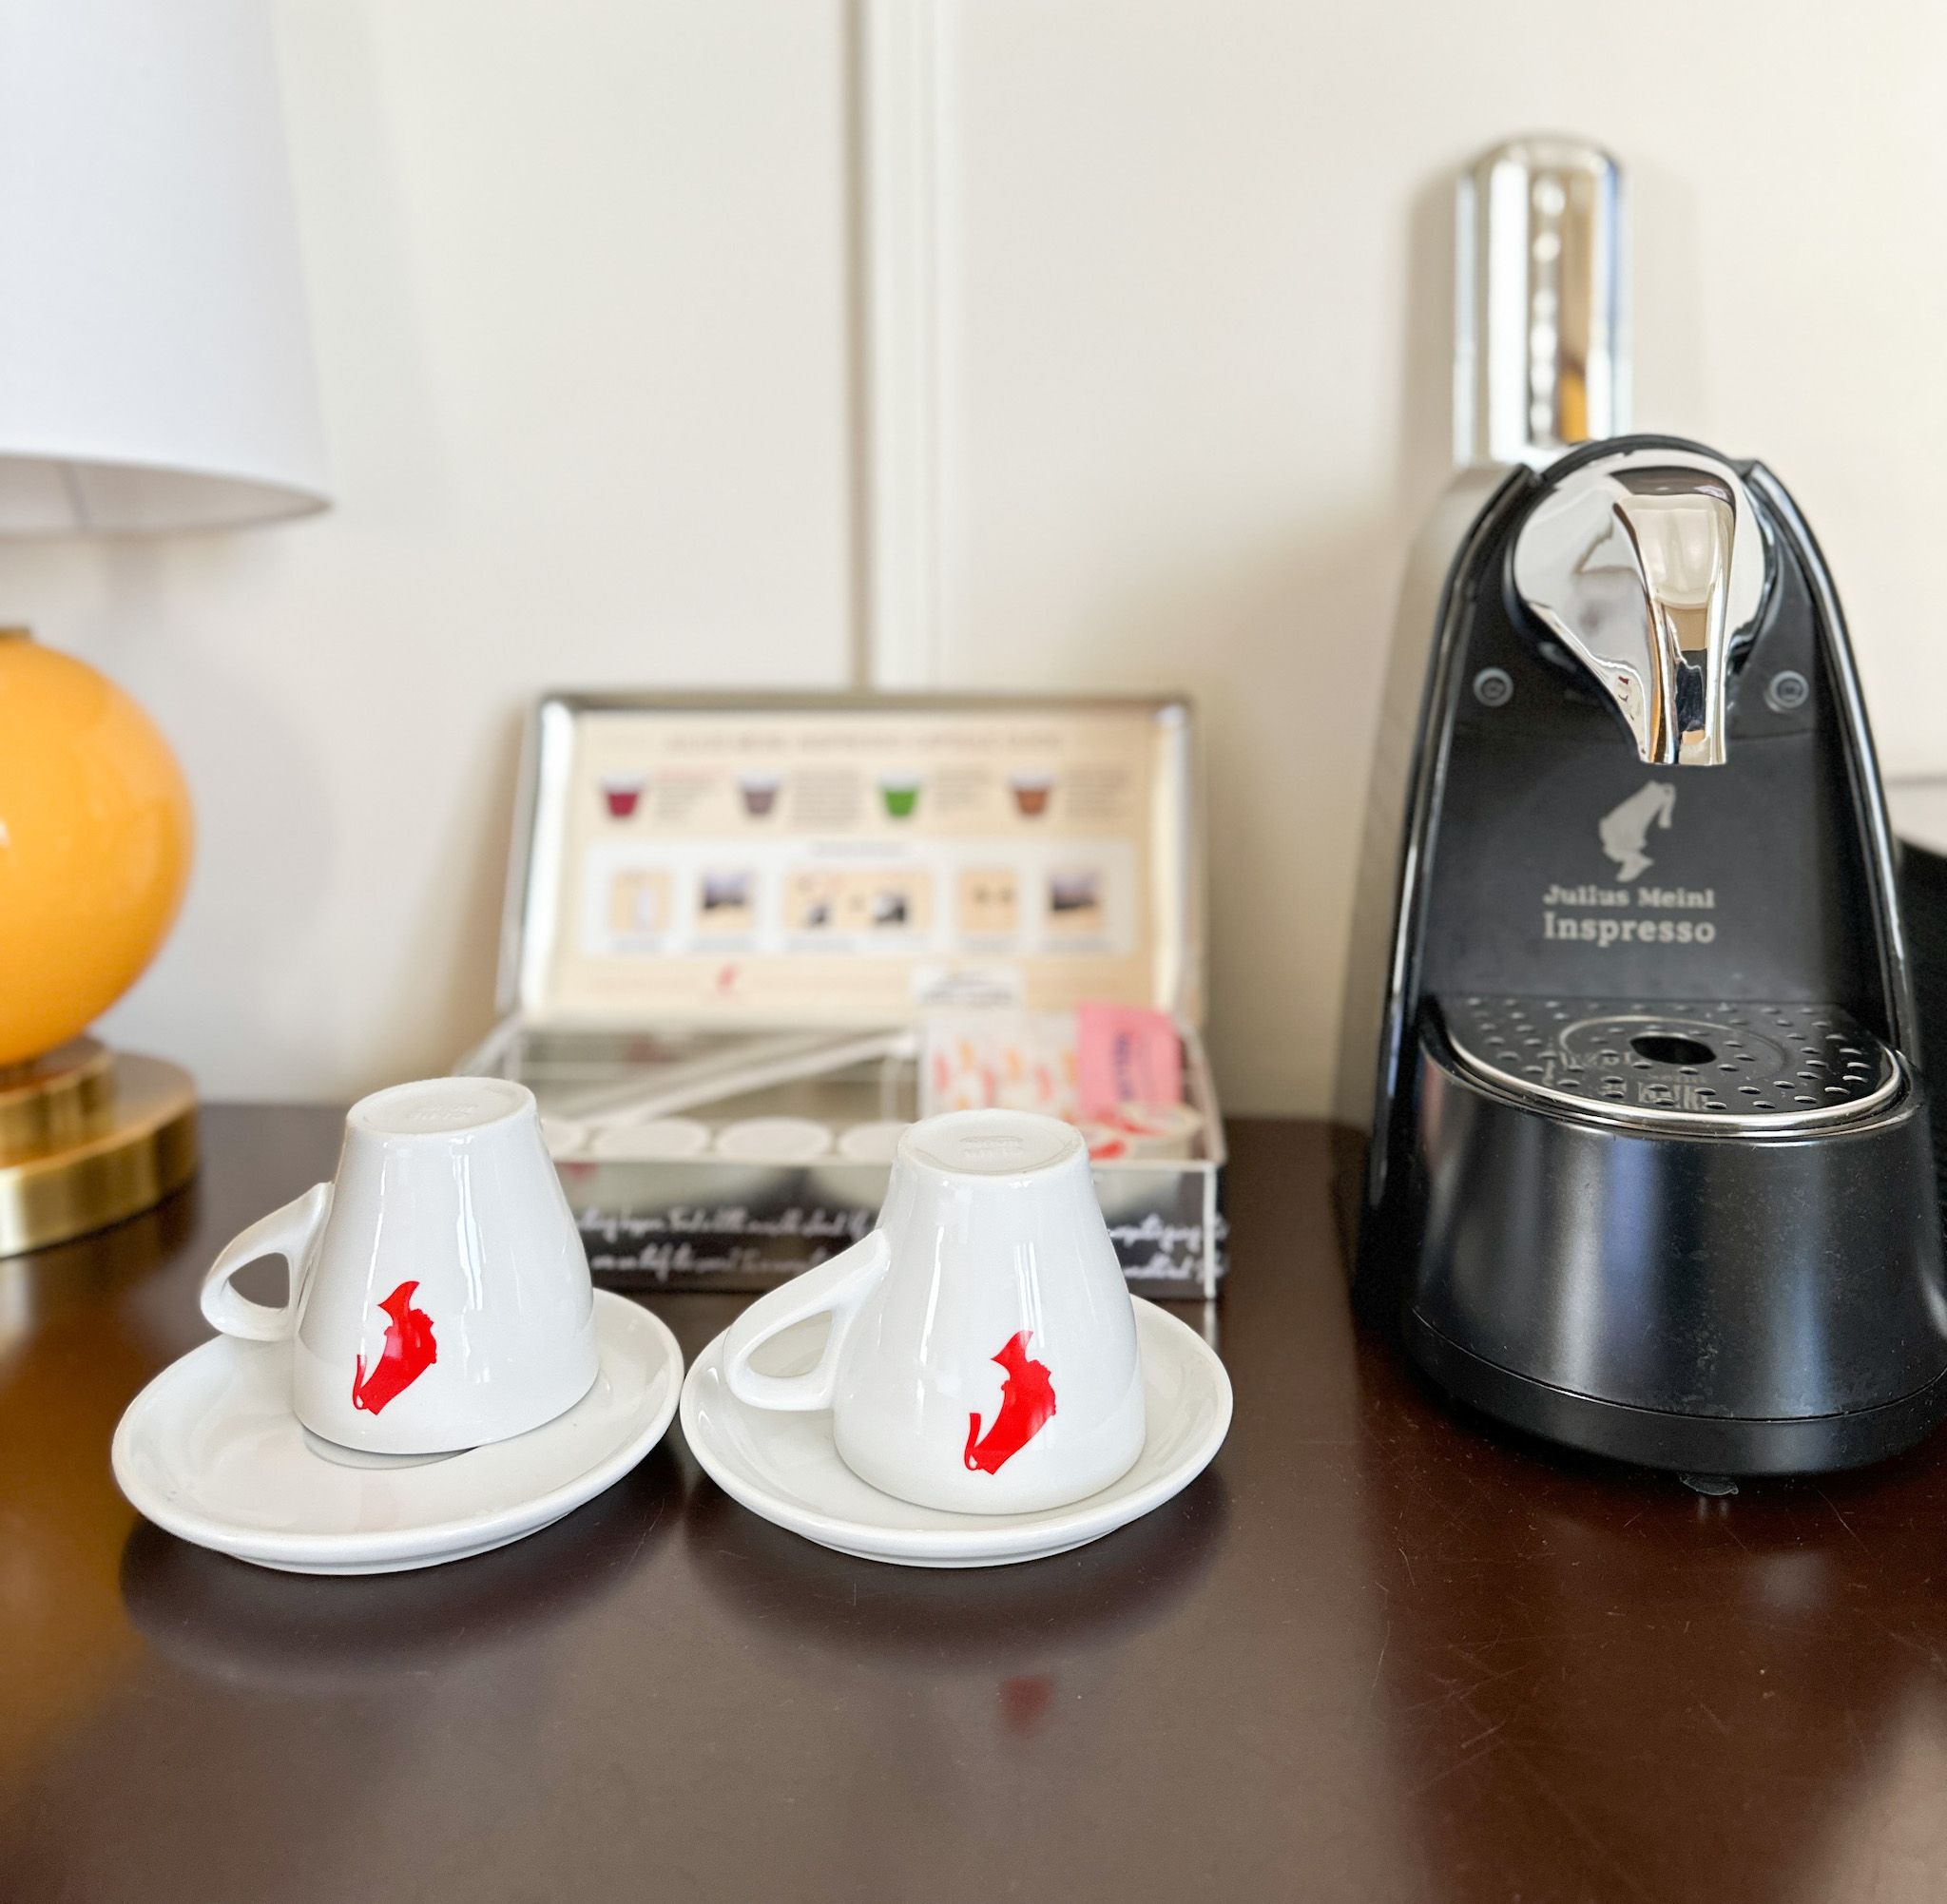 Hotel Zamora in-room coffee machine with cups and complimentary coffee